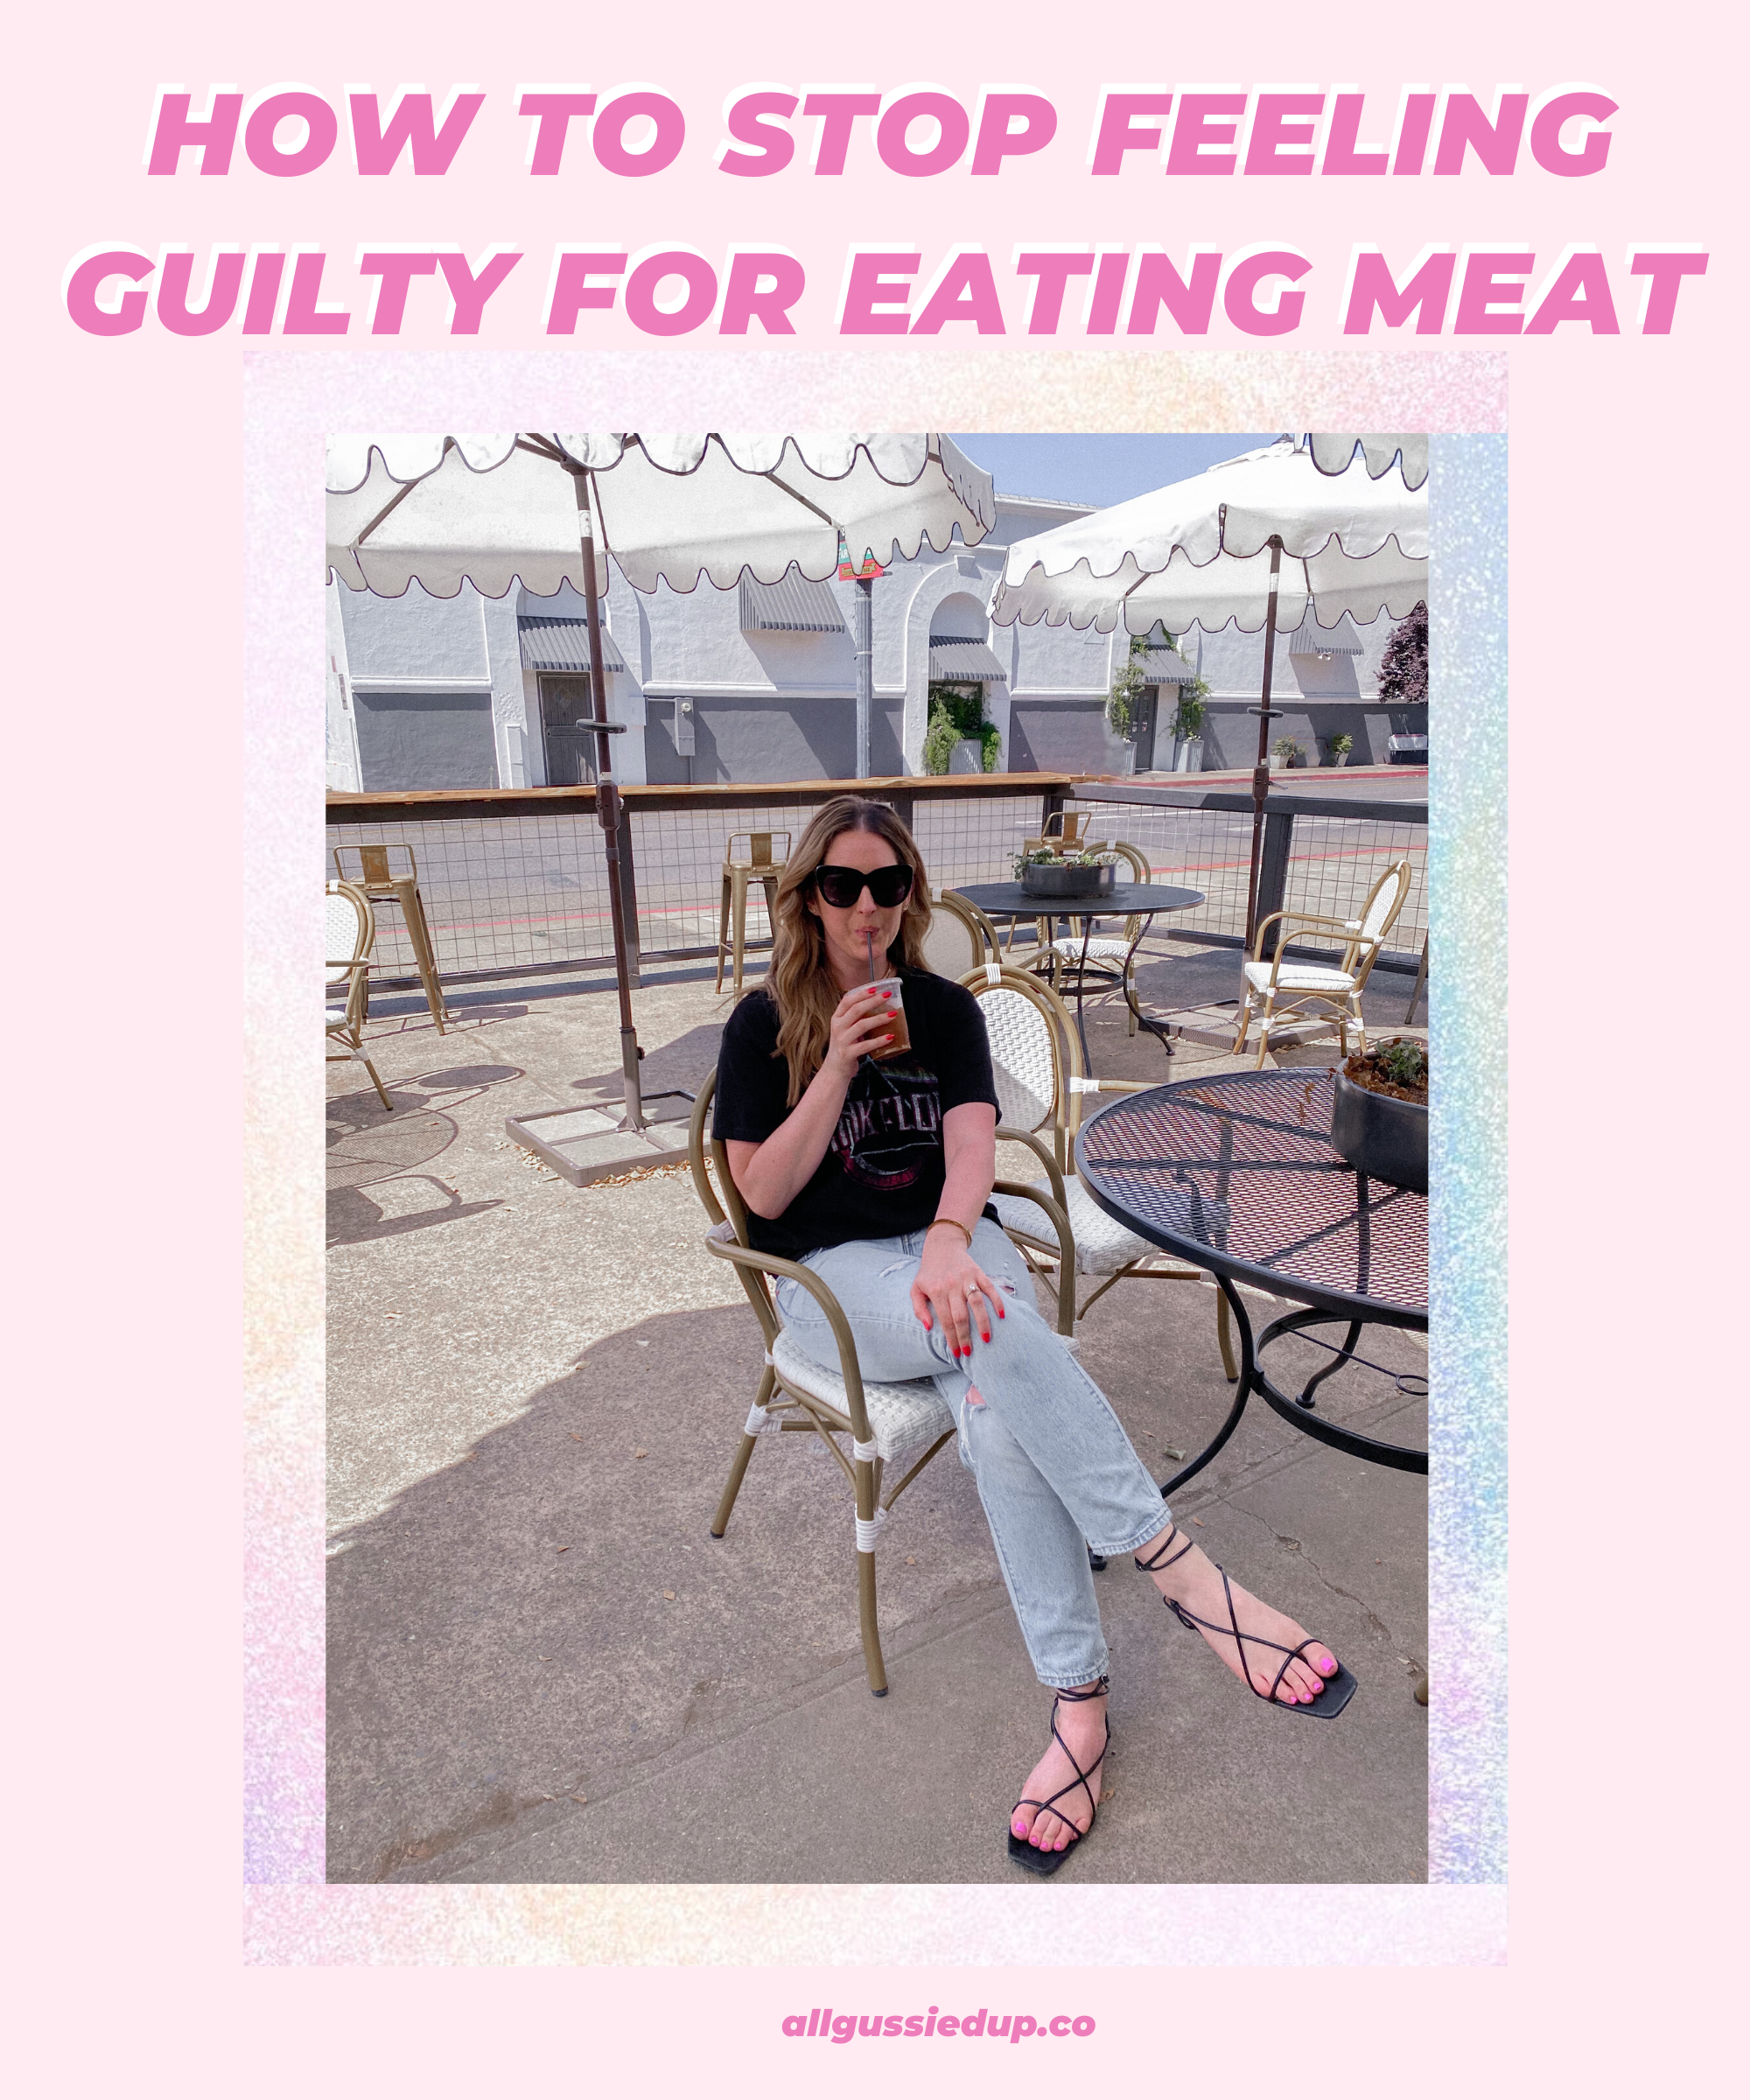 How to stop feeling guilty about quitting veganism